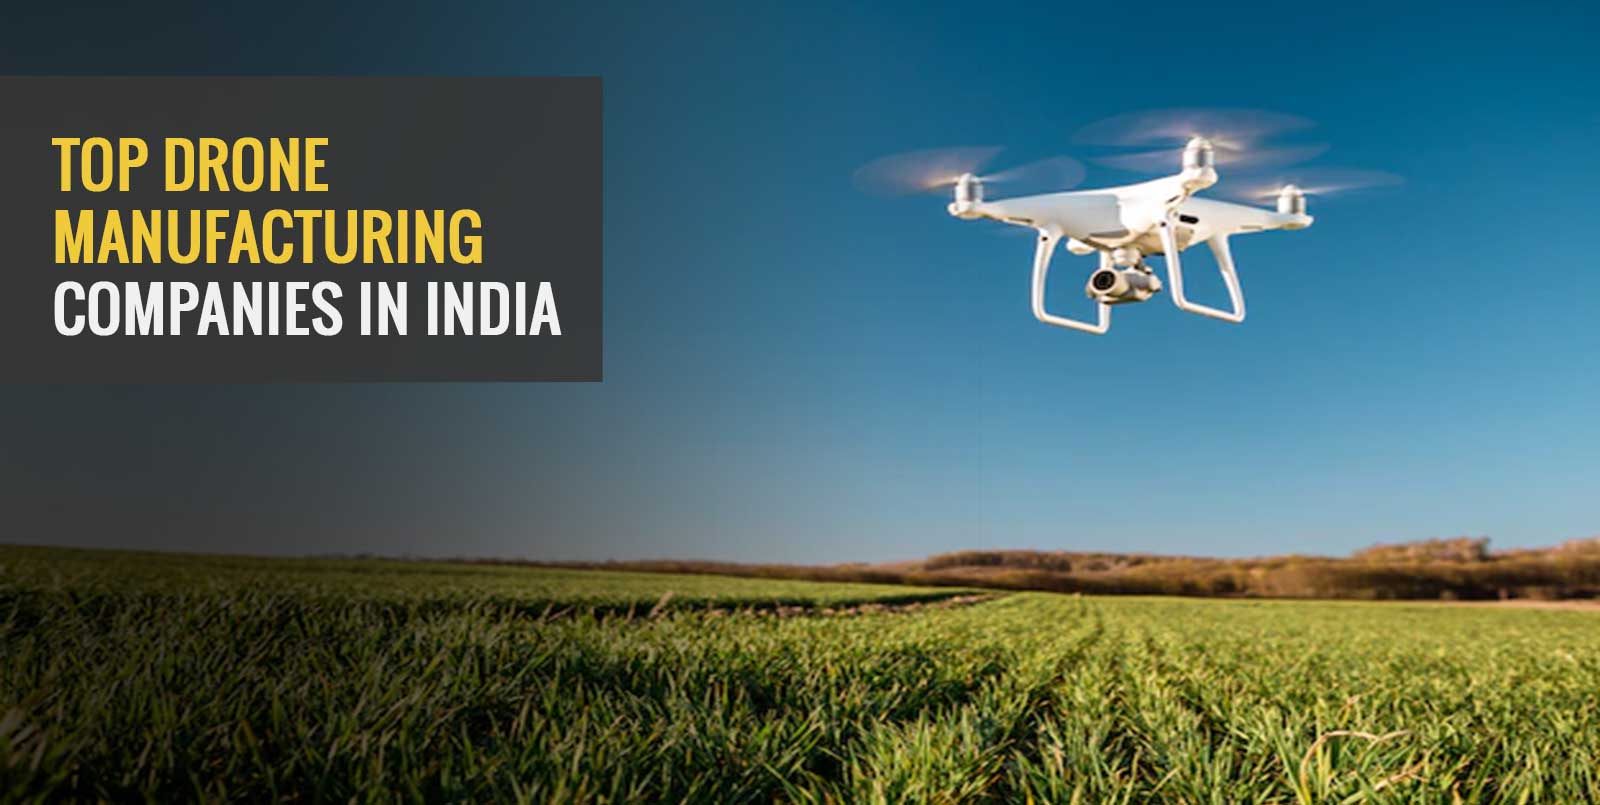 Career Opportunities  How Drone Technology can shape your future: Courses,  eligibility, opportunities - Telegraph India